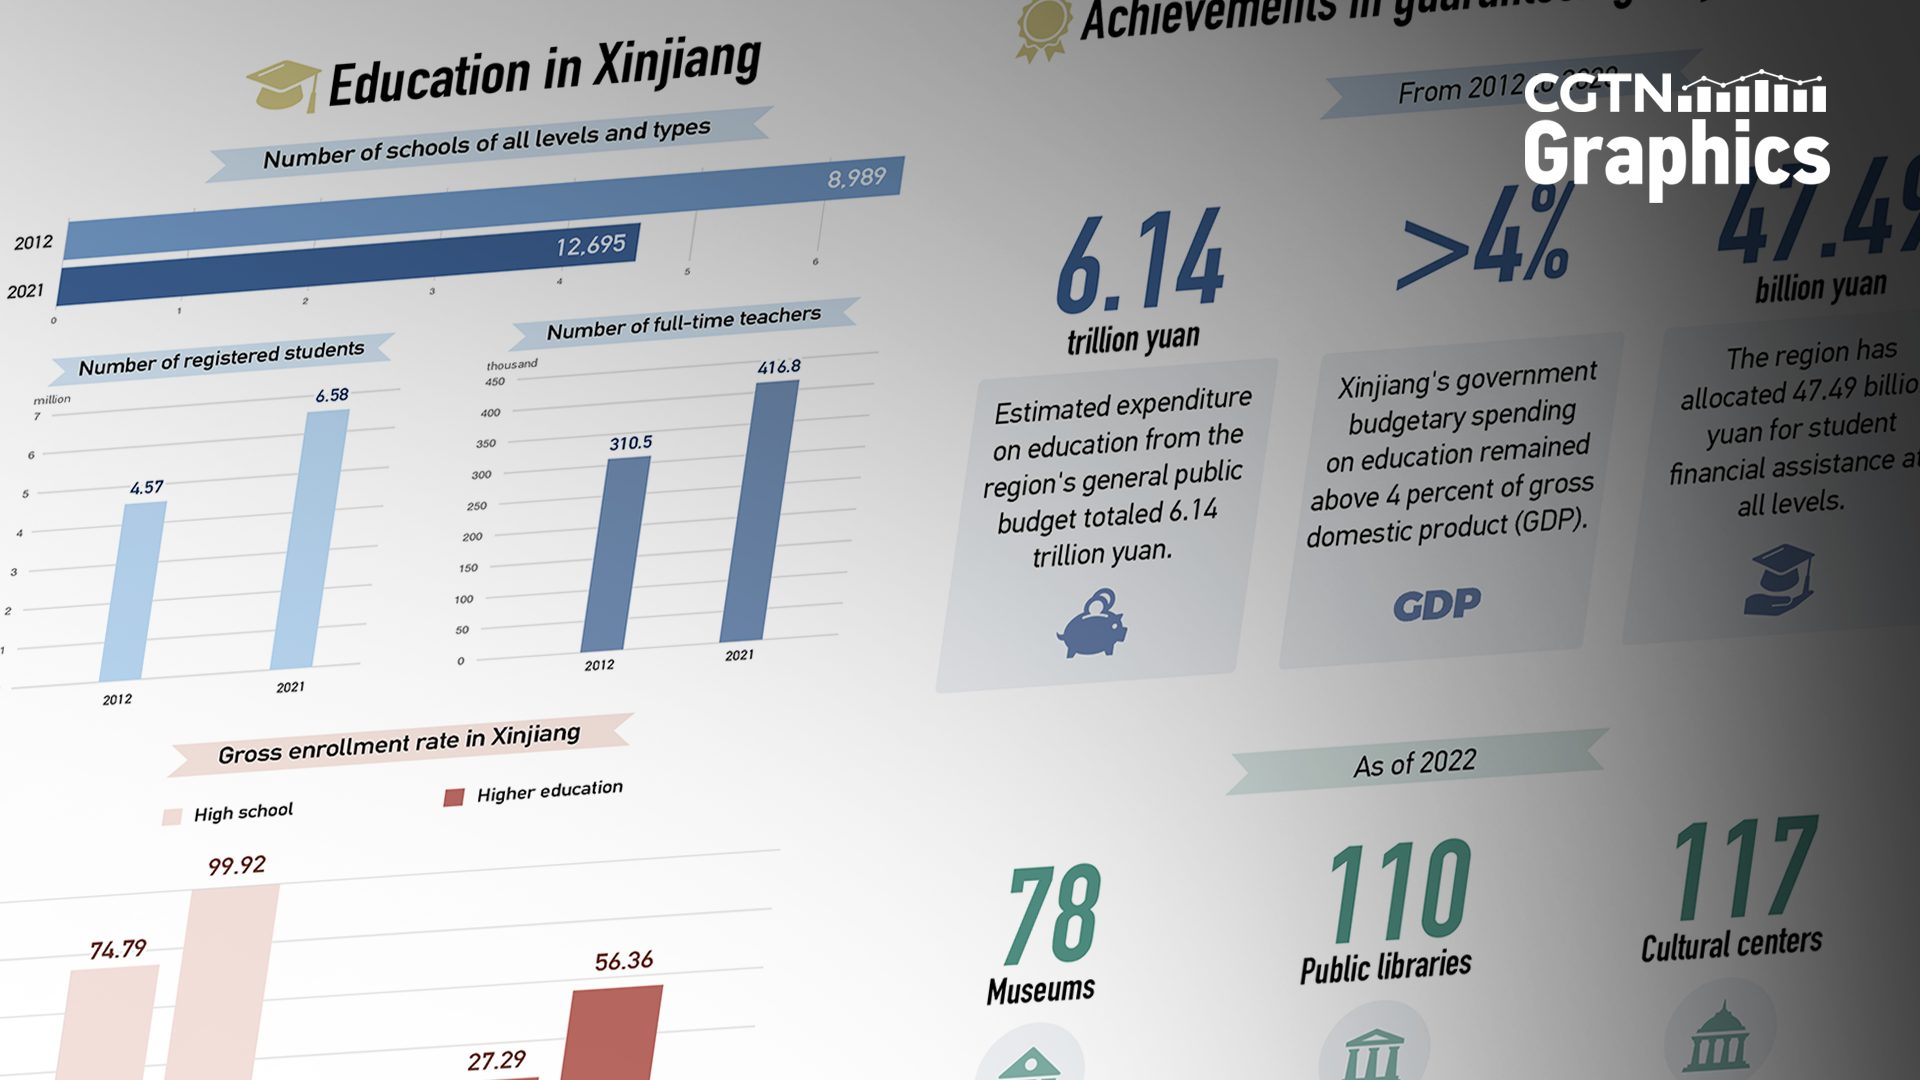 Graphics: Sustainable educational development in Xinjiang